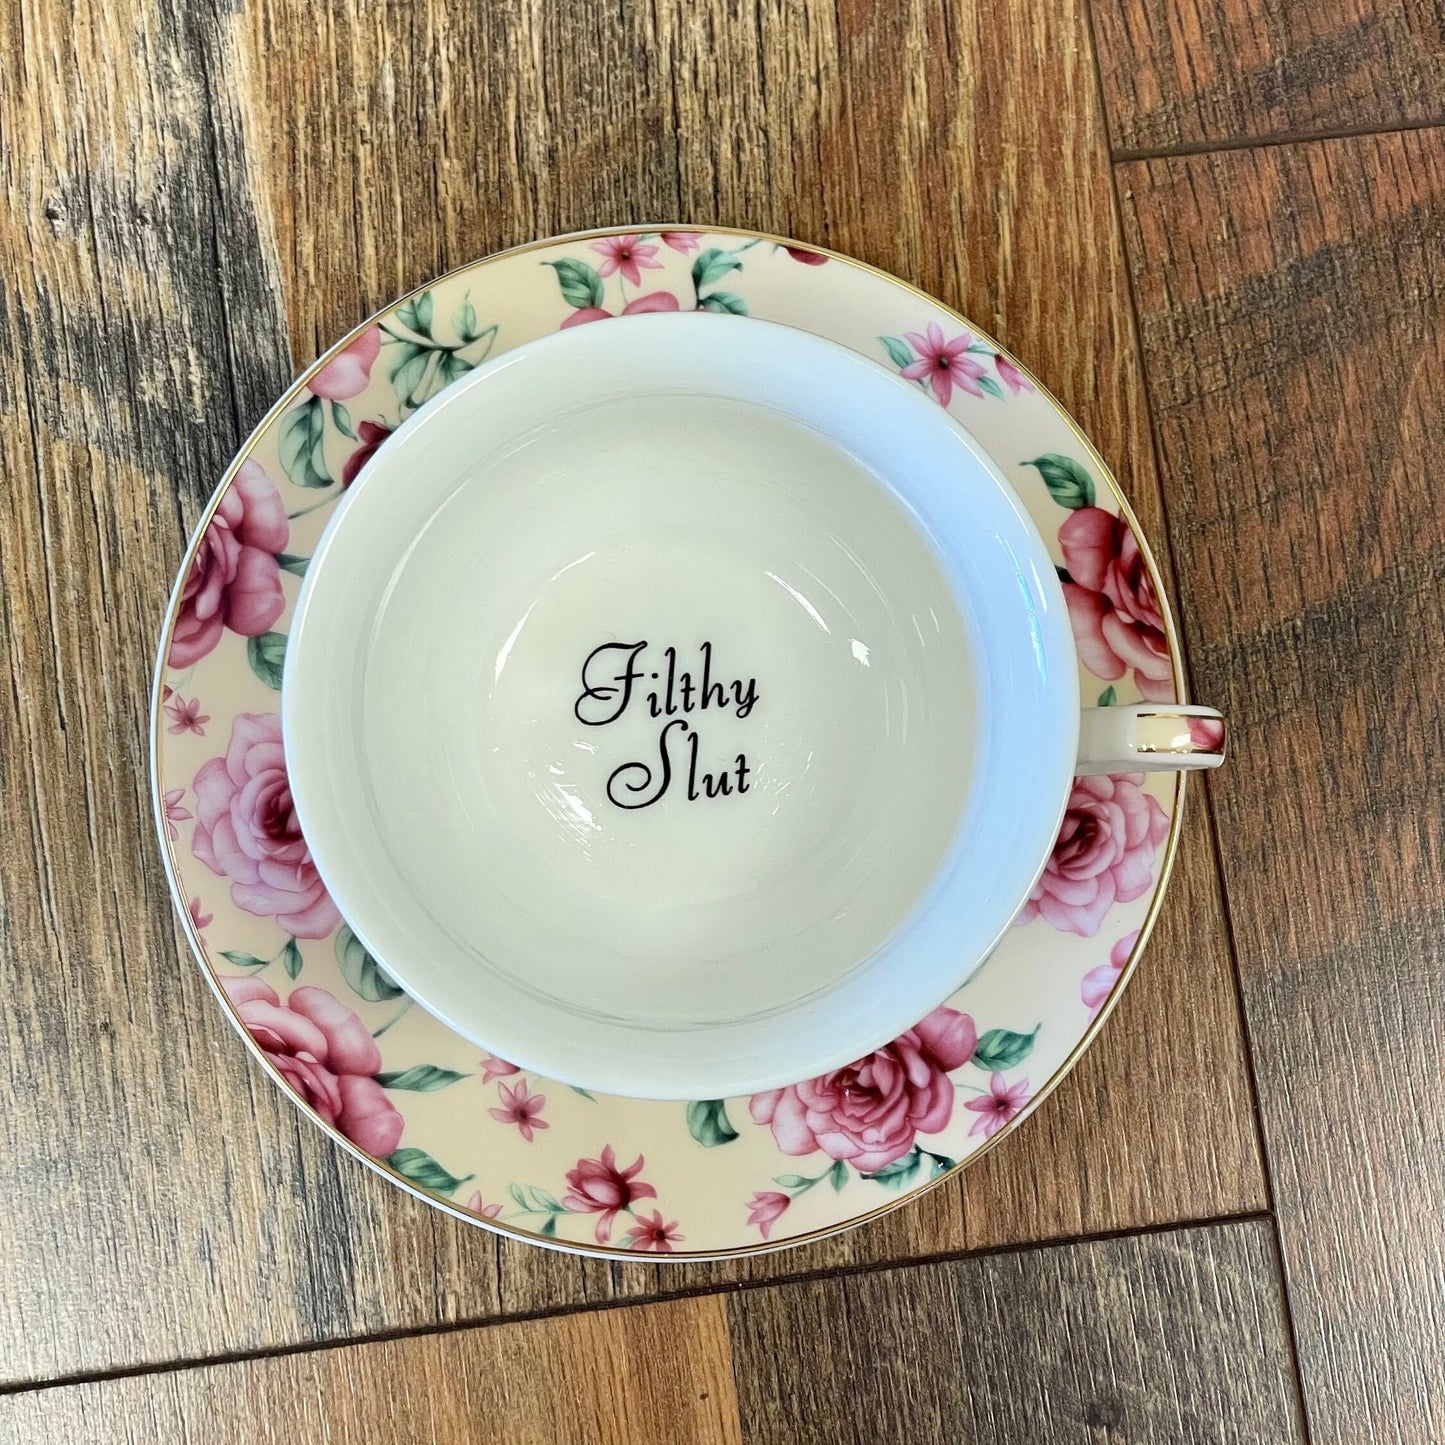 Filthy Slut, Pastel Yellow Tea cup and saucer